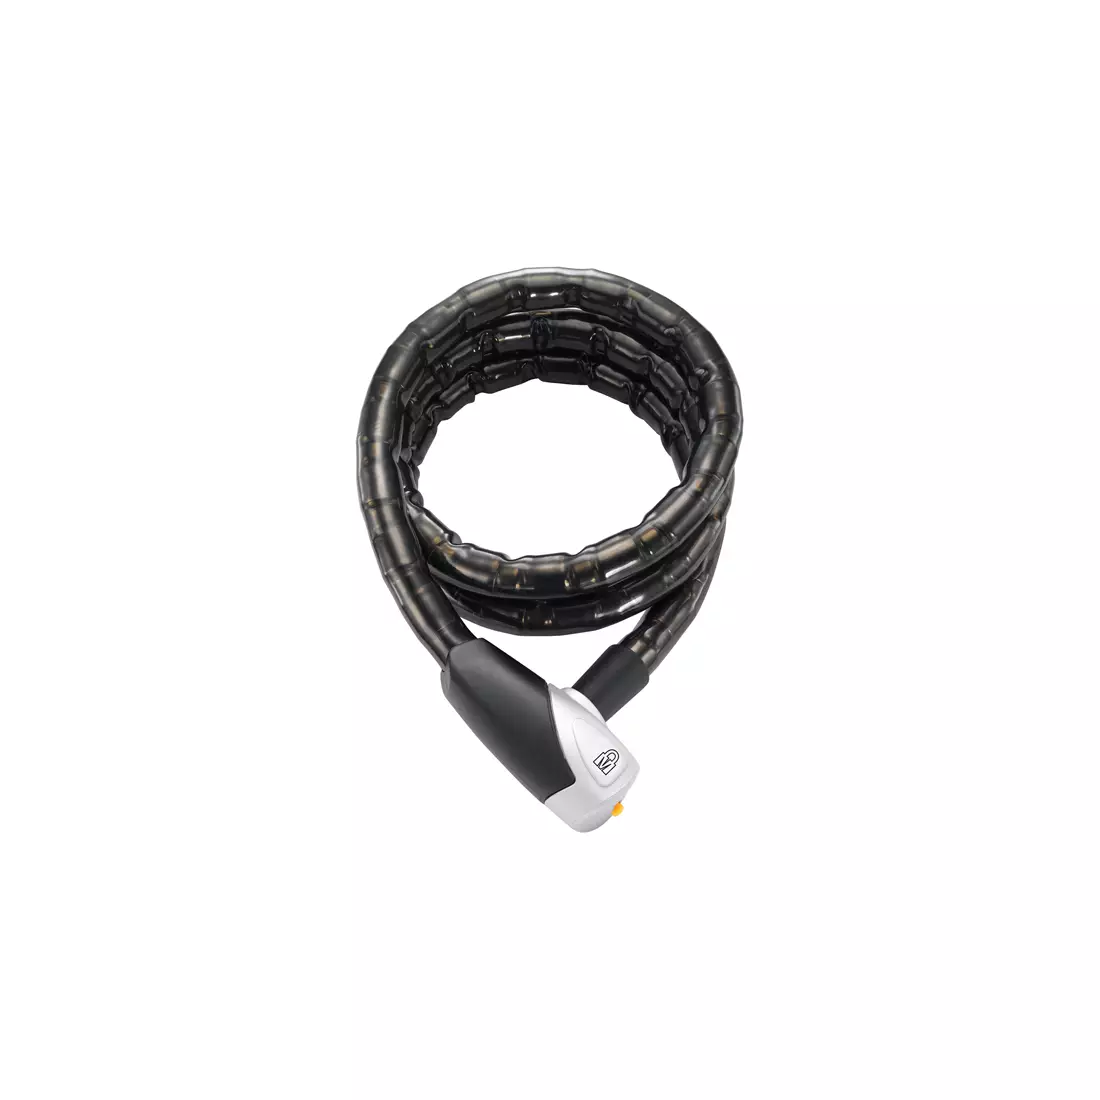 MAGNUM bicycle lock cord 180cm 5 keys with a code black MGN-3012